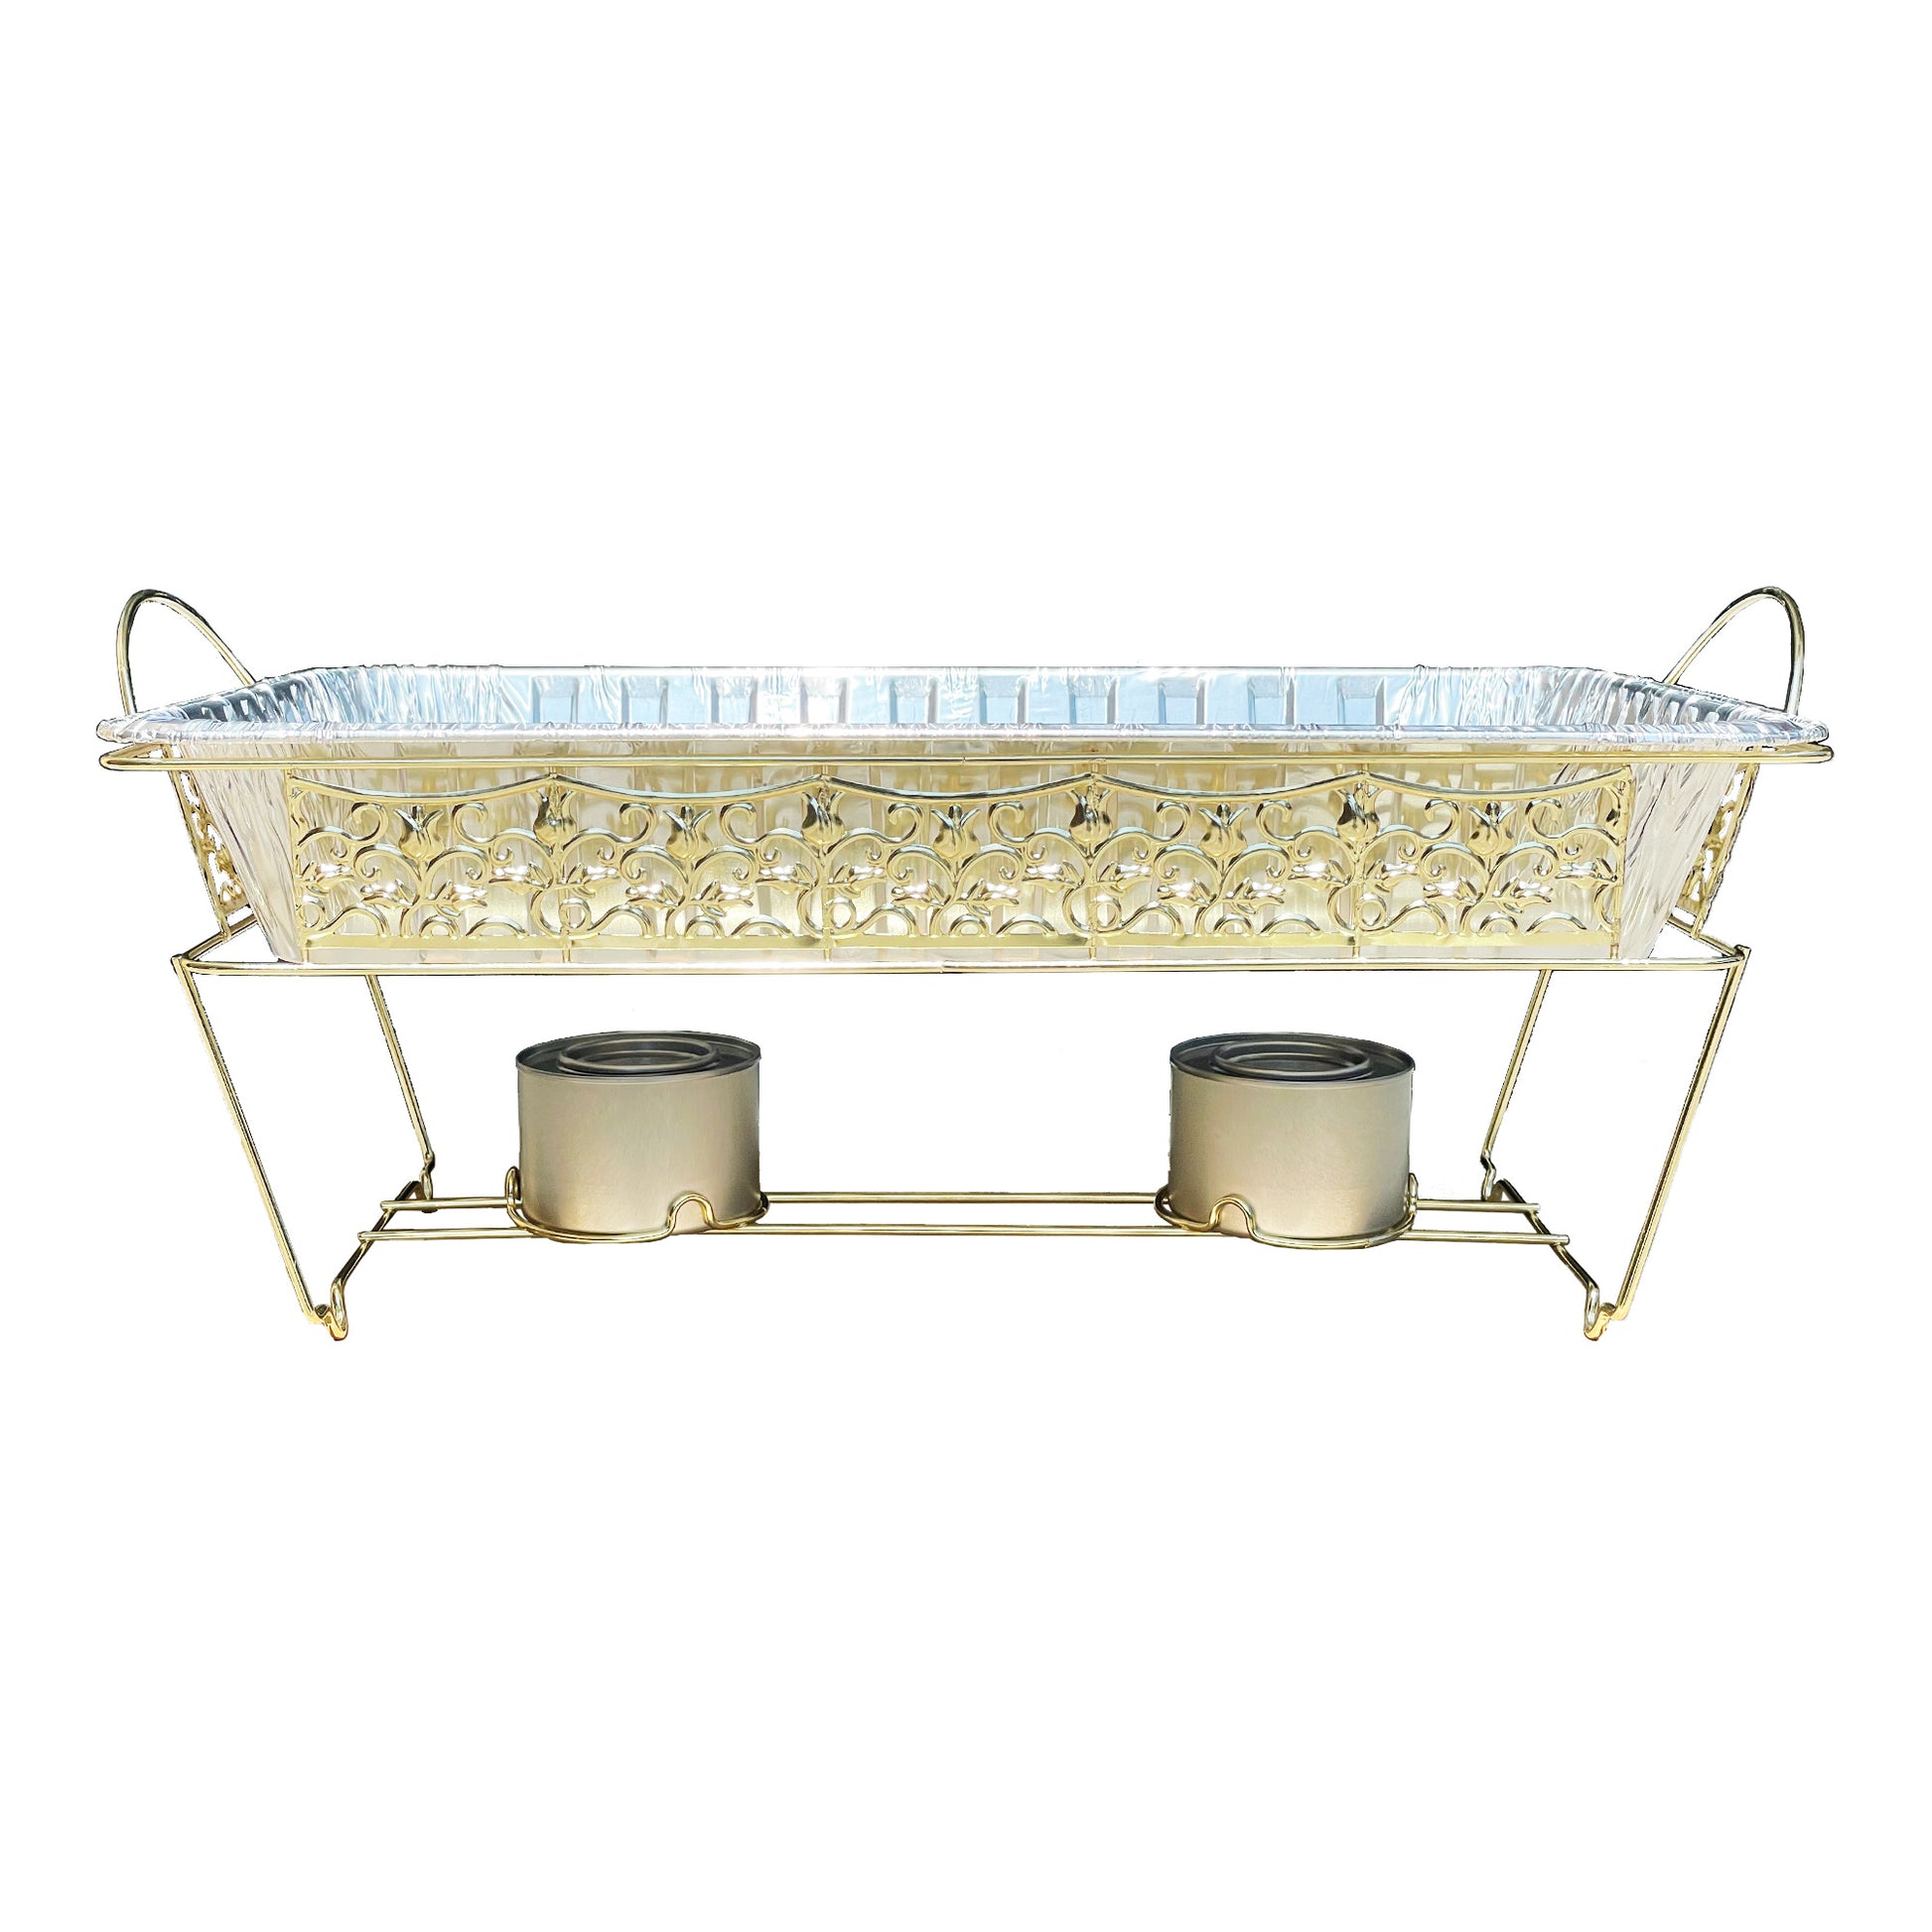 Hanna K. Signature Elements Decorative Disposable Gold Full size Chafing Rack Disposable Hanna K   